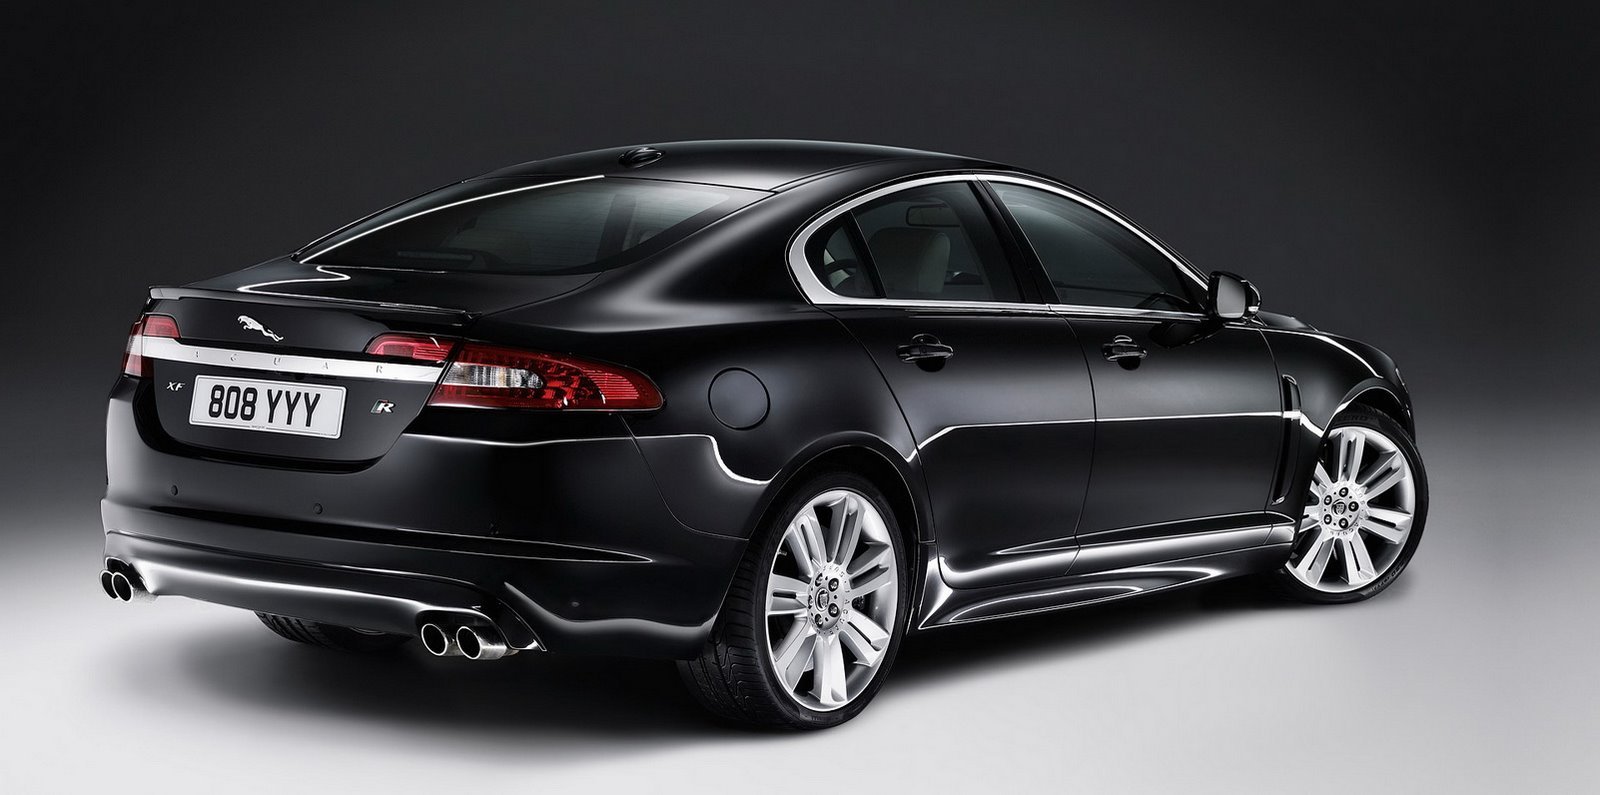 SPORTS CARS: Jaguar XFR 2013 Price, review, features, specs, and Information